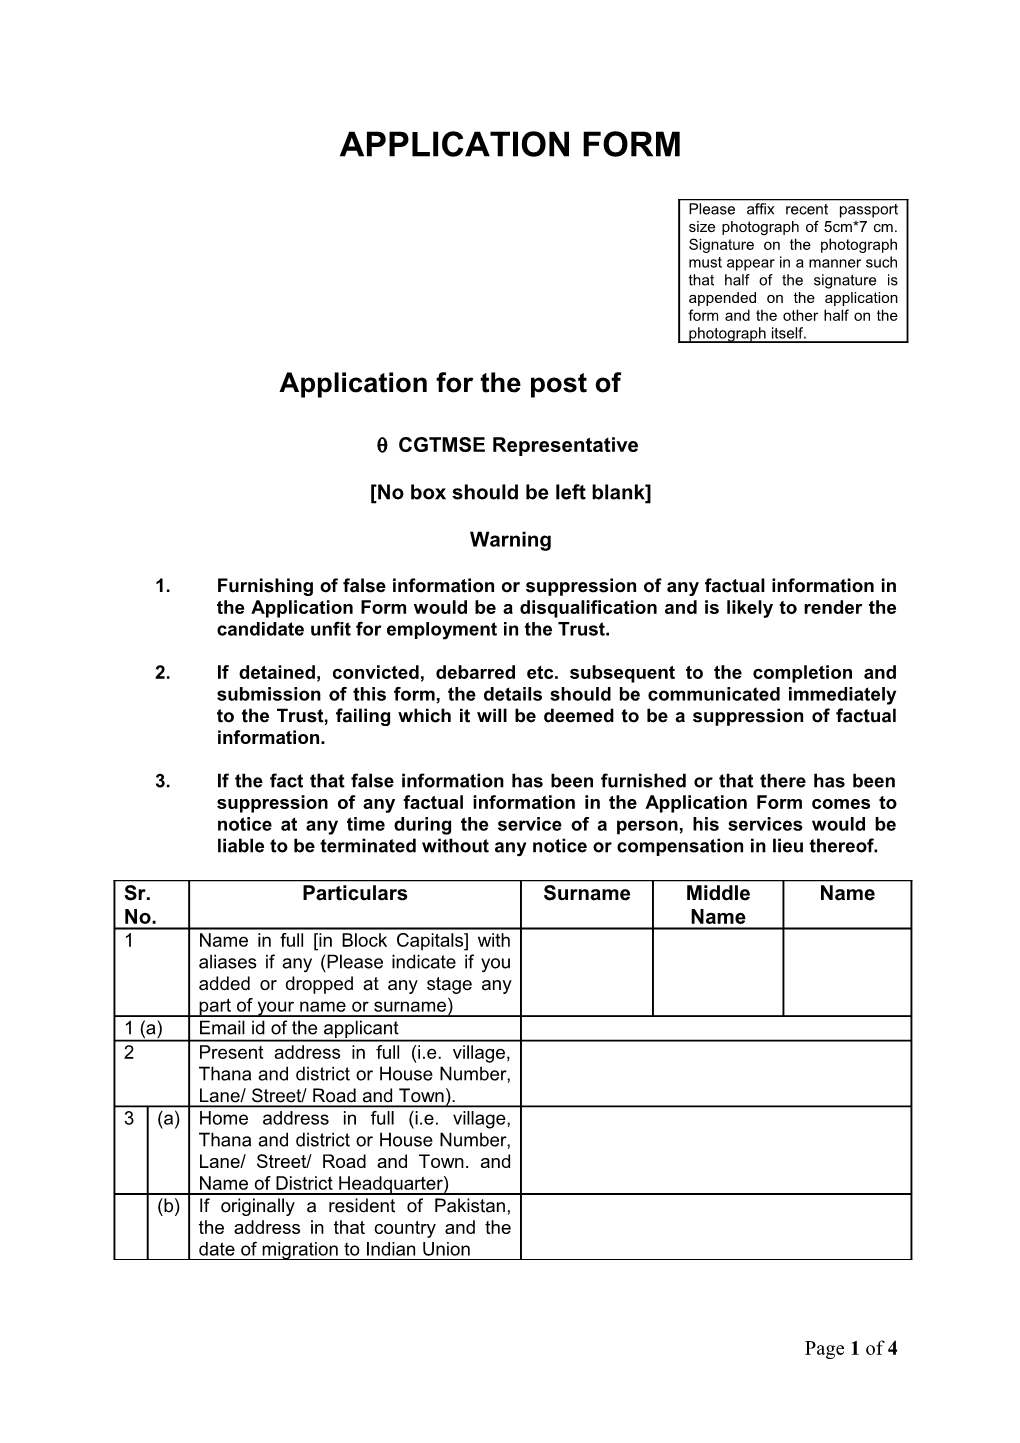 Application Form s21